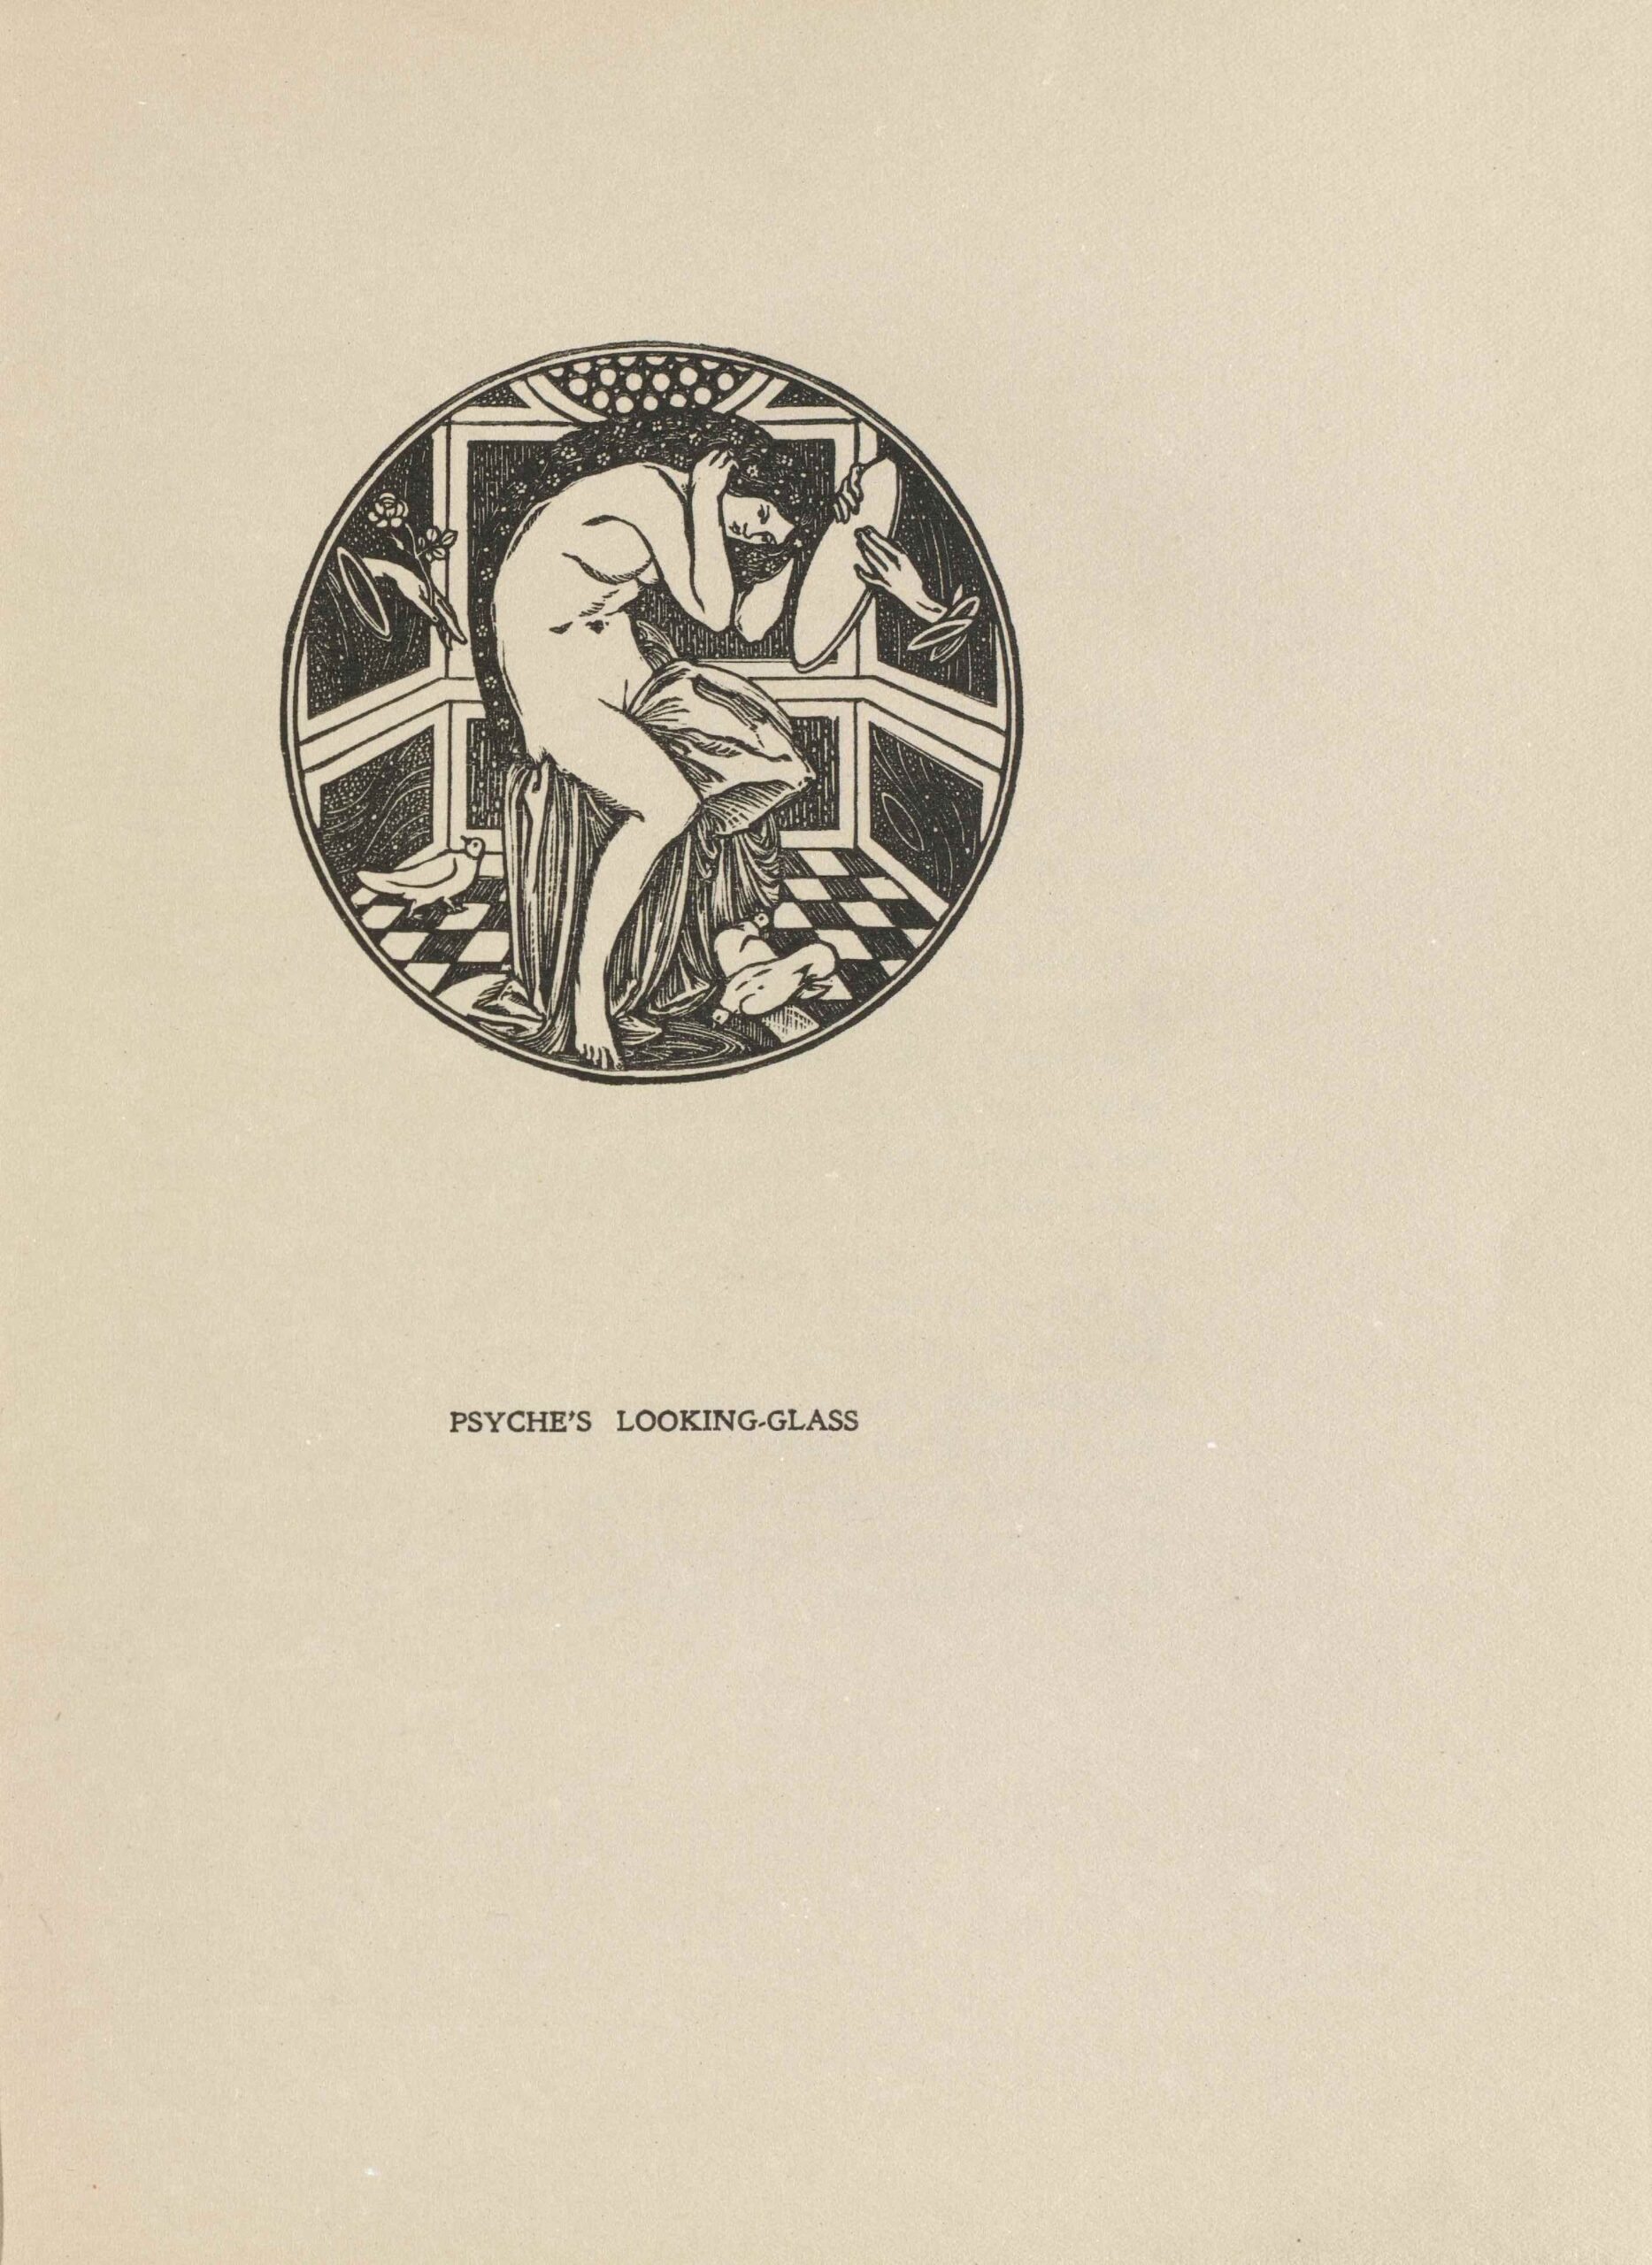 The image is within a small, circular, border and is centered in the upper region of the page. The image is printed in black ink. In the foreground, a naked woman (Psyche) is in a small room with dark, rectangular-paneled walls and checkered black-and-white flooring. She has long dark hair which is decorated with small white flowers. The woman is facing to the right, sitting on a stool draped in cloth, and is looking down into a circular looking glass held by a hand emerging from the wall in front of her on the right side of the room. The hand emerging from the left holds a single flower with a long stem. Three small birds are present on the checkered floor. Two birds are at the woman’s feet. One of them appears to be drinking from a small pond embedded in the middle of the floor. The third bird is in the background left of the image and is looking upwards towards the hand holding a flower.